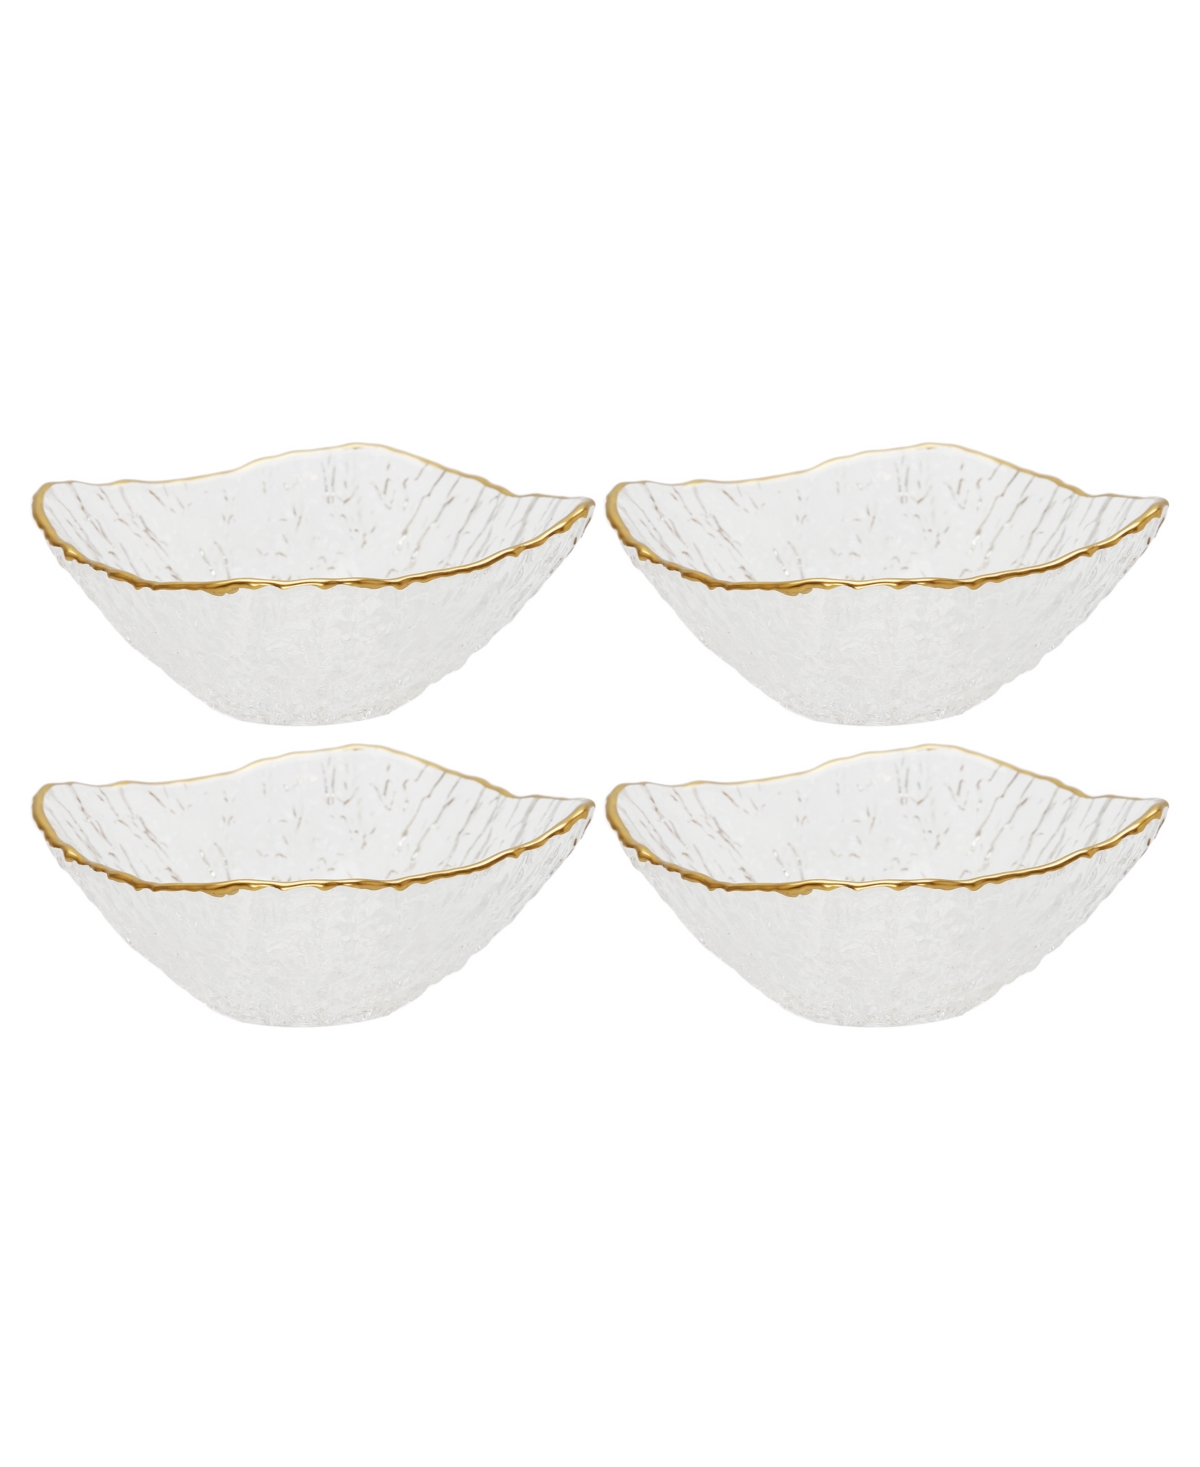 Classic Touch Crushed Glass Square Dessert Bowl With Rim, Set Of 4 In Gold